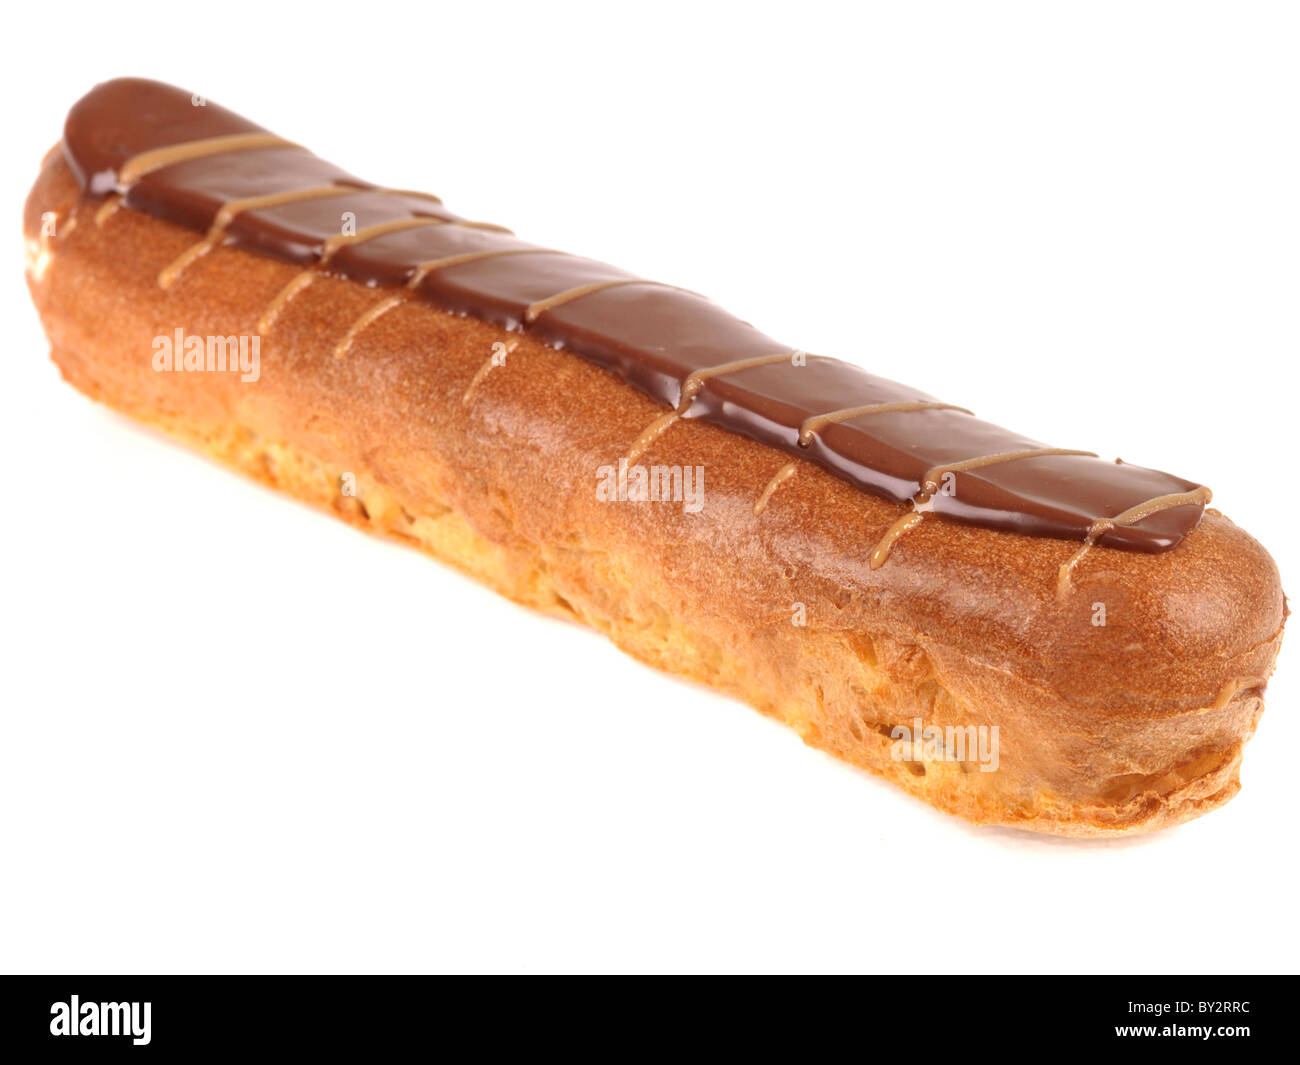 Freshly Baked Tasty Chocolate Eclair Choux Pastry Desserts Buns Isolated Against A White Background With Copy Space A Clipping Path And No People Stock Photo